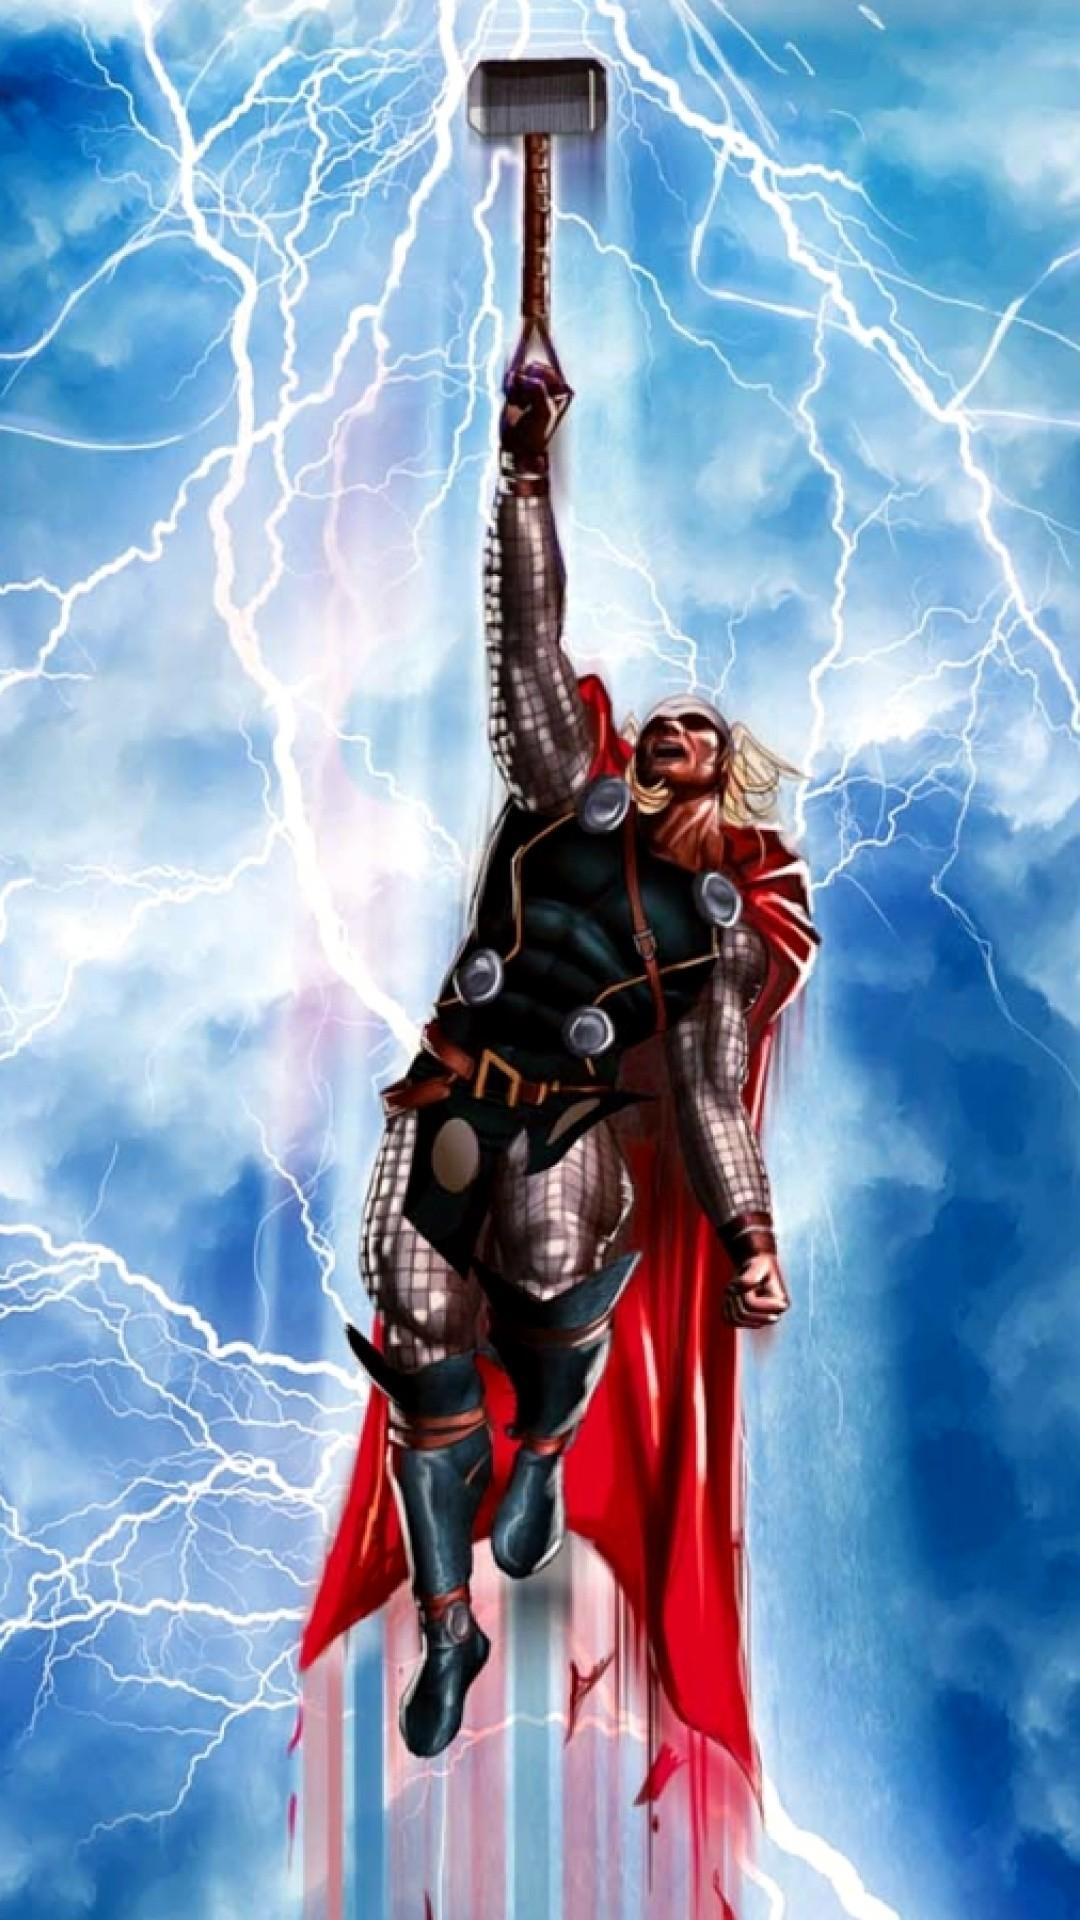 1080 x 1920 · jpeg - Thor iPhone Wallpapers - Wallpaper Cave